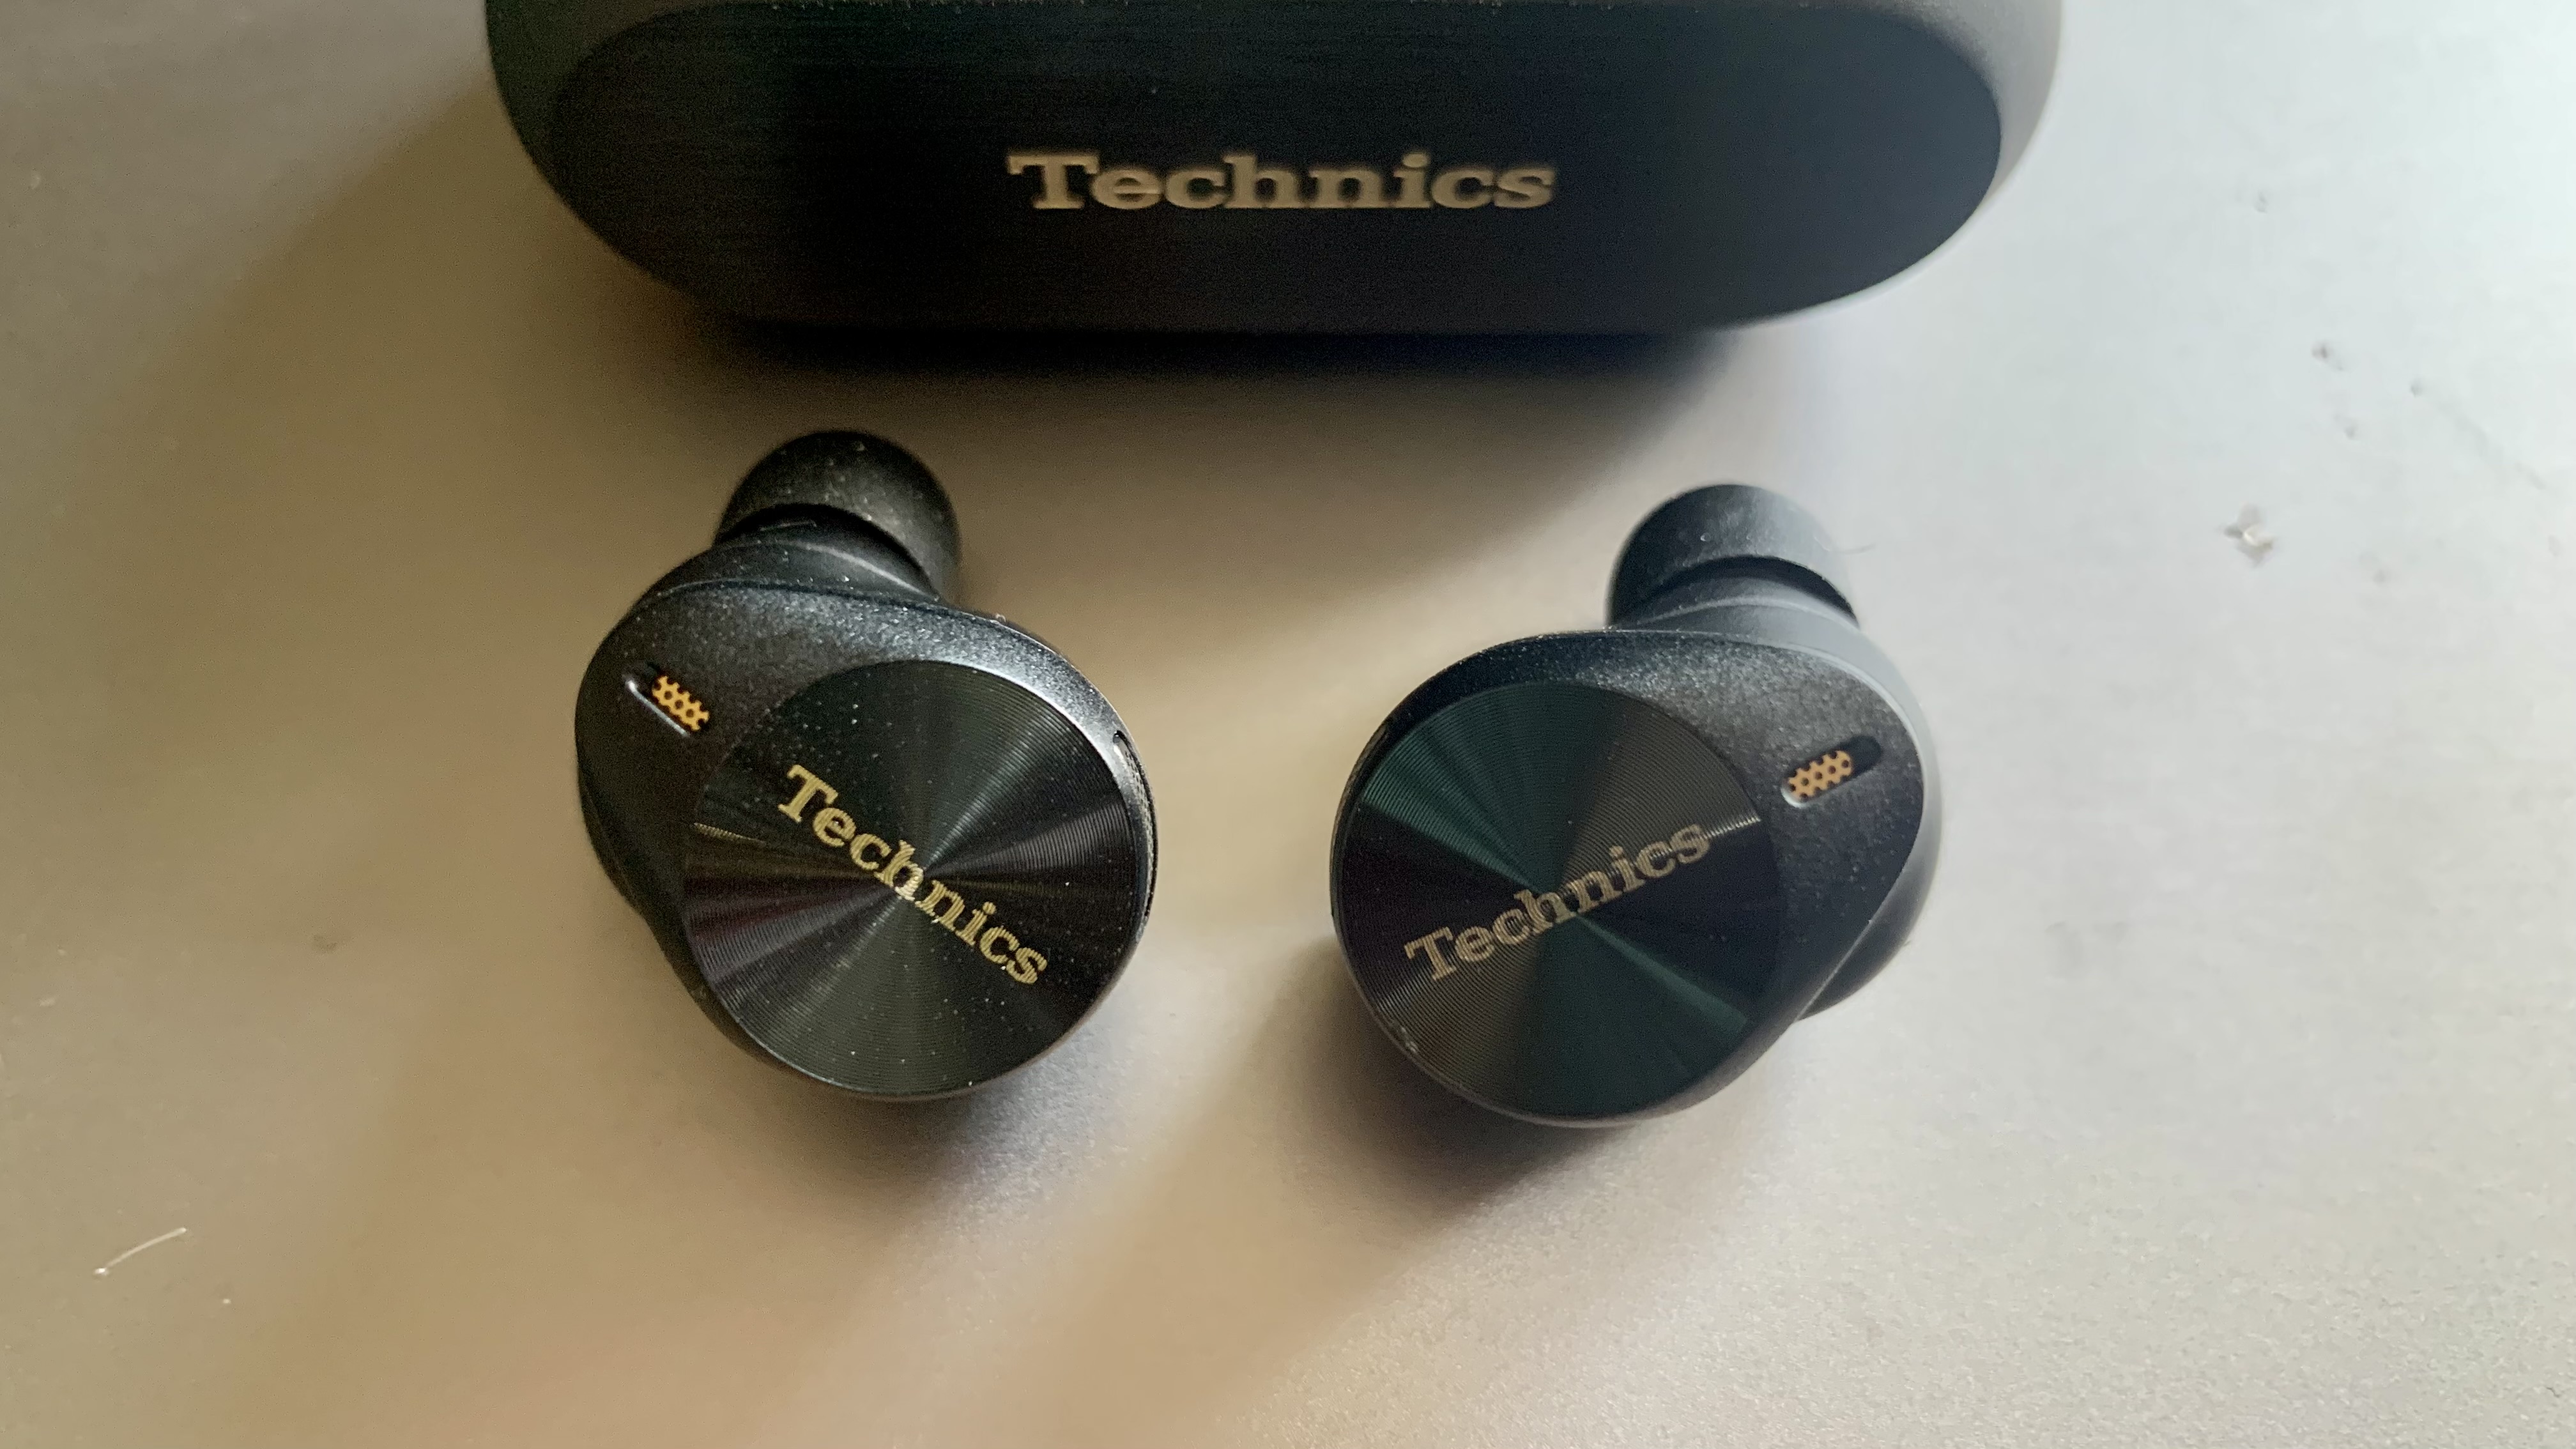 Technics EAH-AZ80 earbuds and case on a brown table